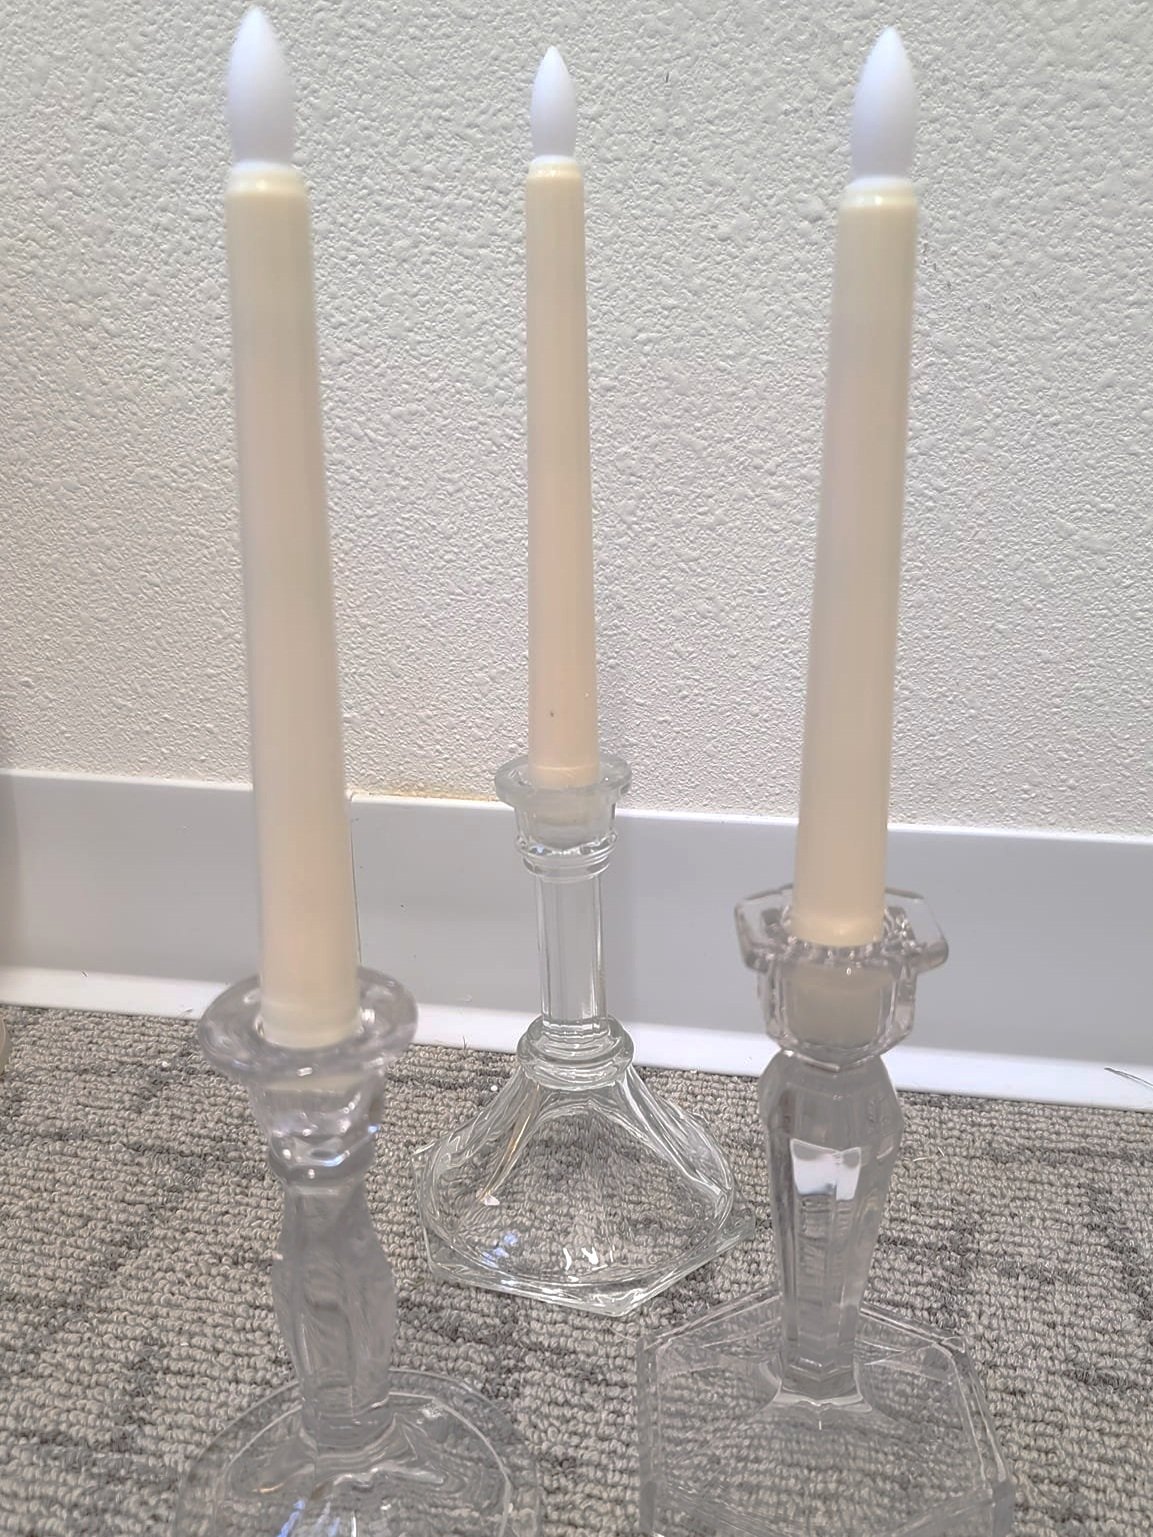 Trio glass taper LED candle set- $12